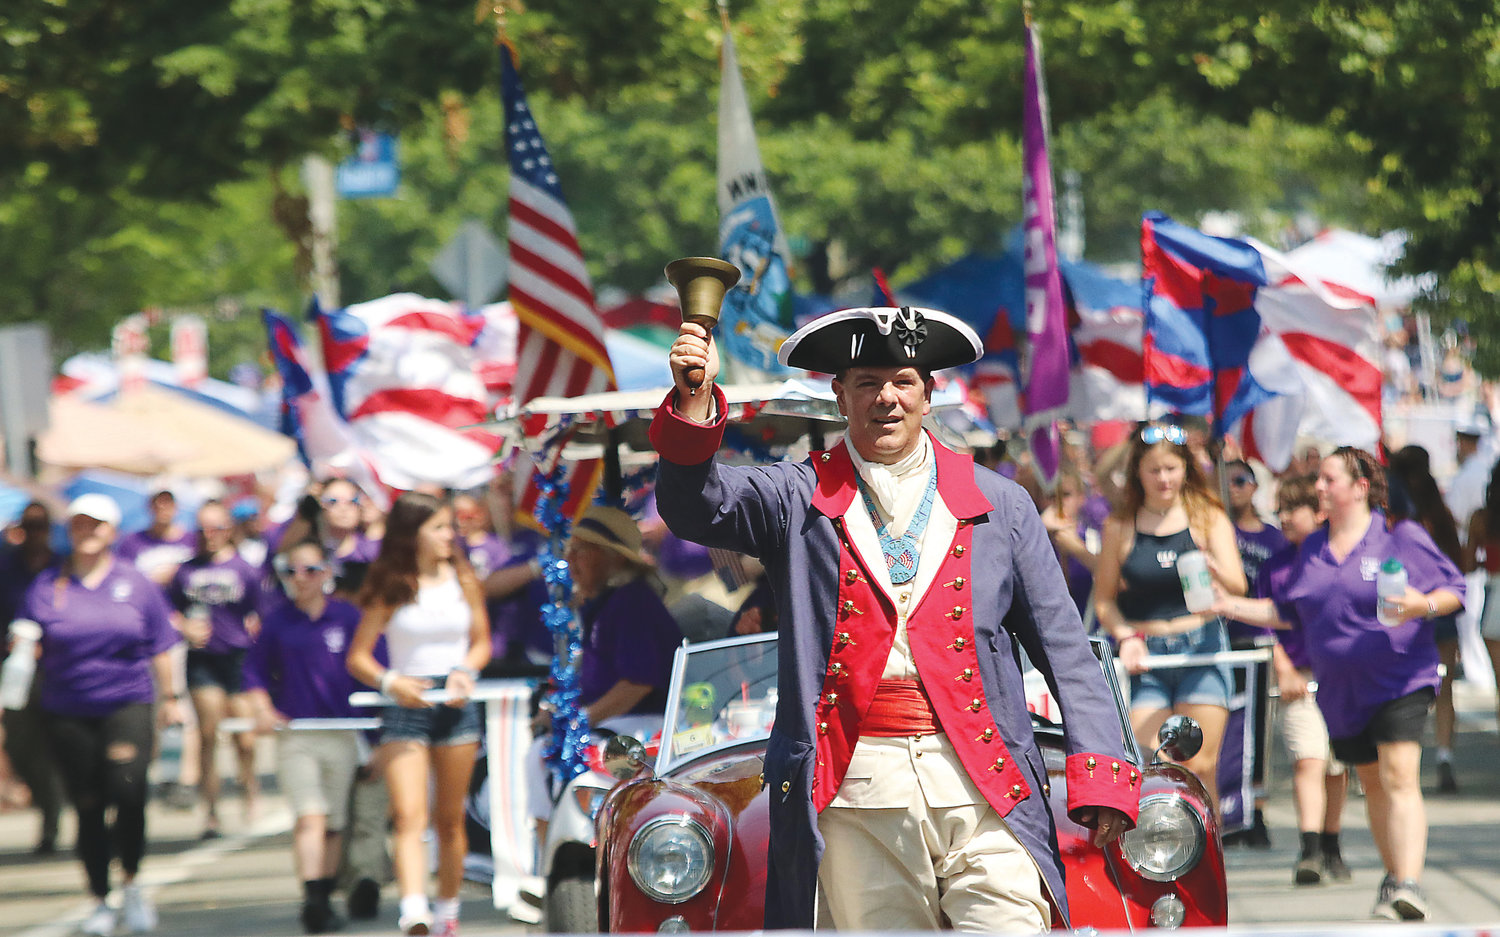 See the 2020 Bristol Fourth of July Parade 'Order of Procession